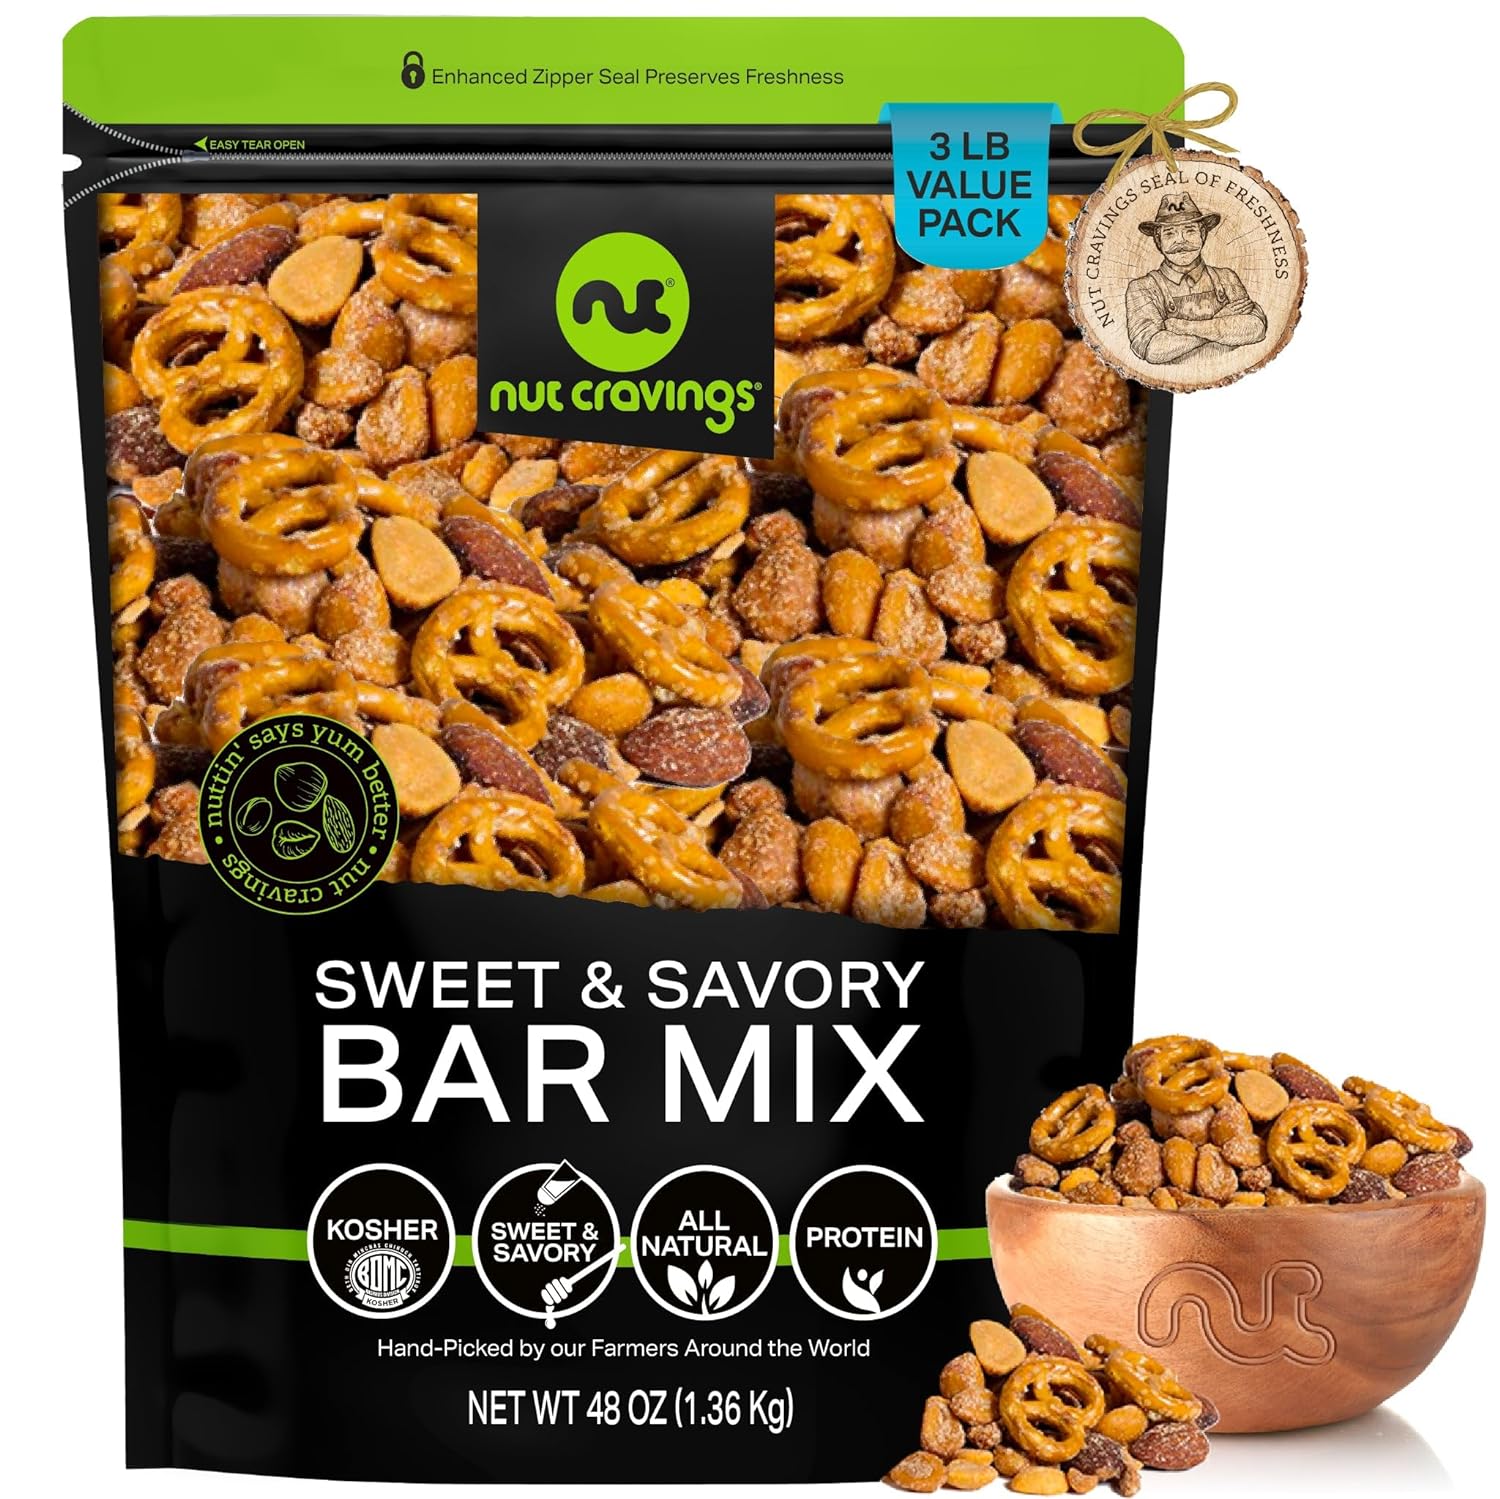 Nut Cravings - Party Bar Nut Mix, Sweet & Savory Pub Snack - Smoked Almonds, Pretzels, Toffee Peanuts, Spicy, Honey Roasted Peanut (48oz - 3 LB) Packed Fresh in Resealable Bag - Healthy Protein Kosher